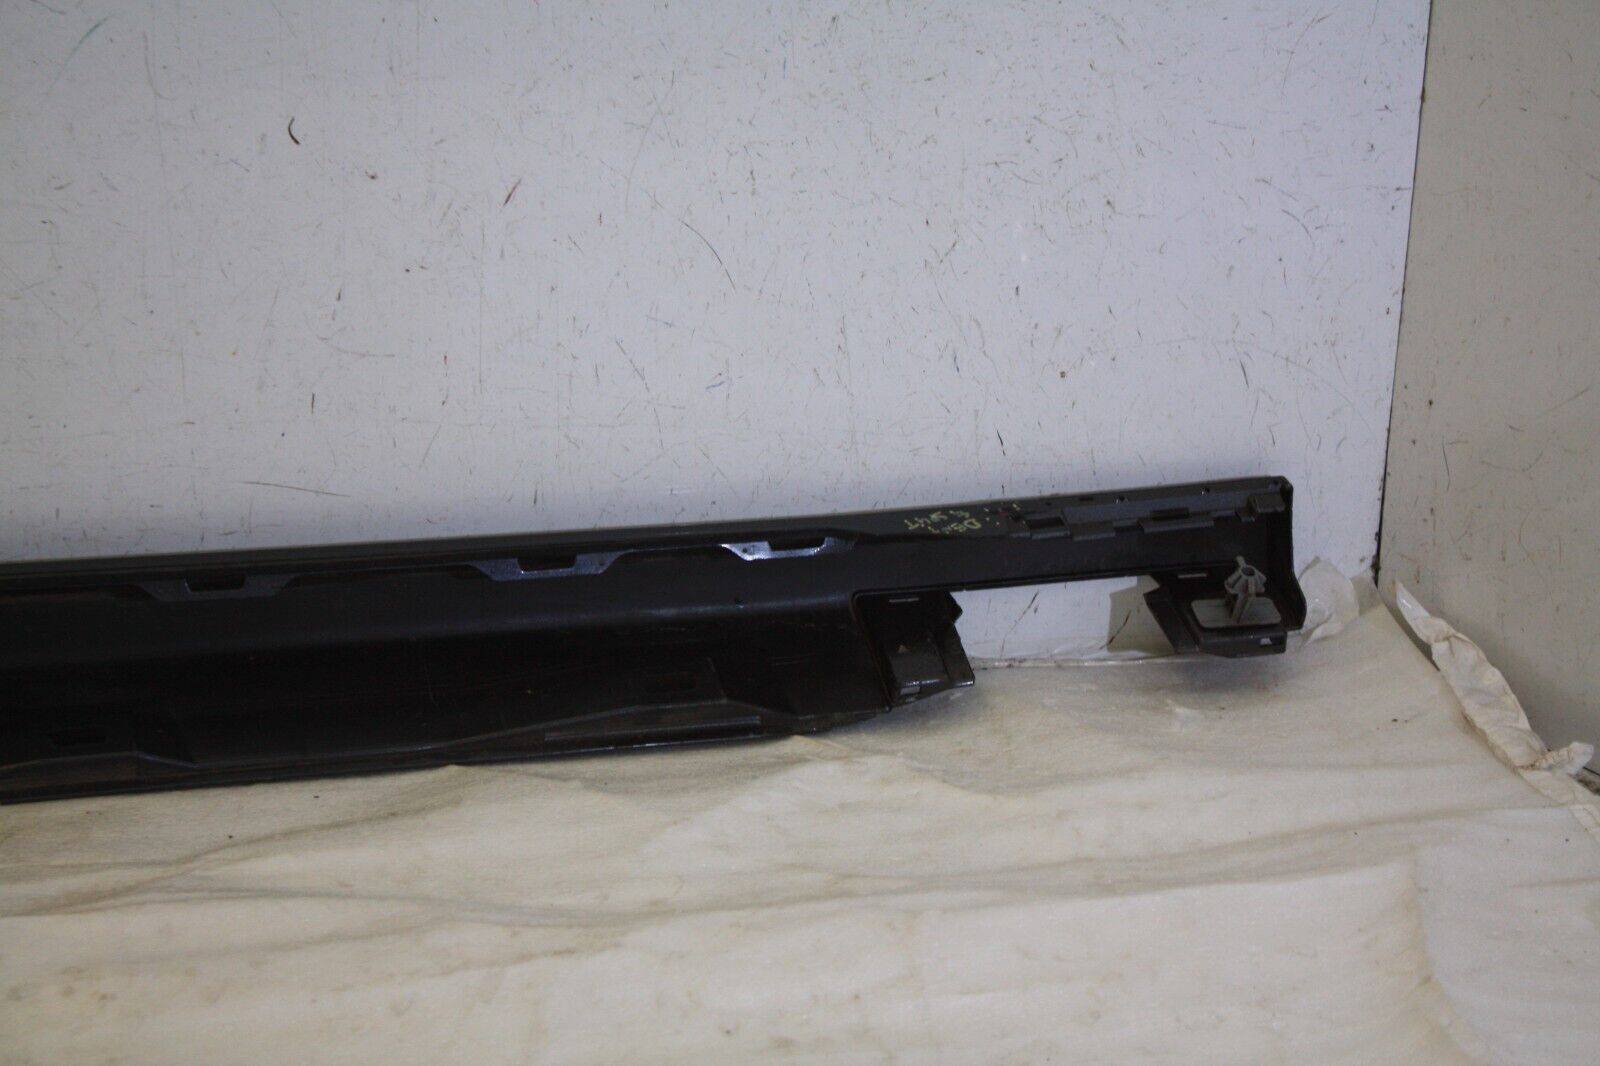 Audi-A6-C7-S-Line-Left-Side-Skirt-2011-TO-2014-4G0853859F-Genuine-SEE-PICS-176215349130-14